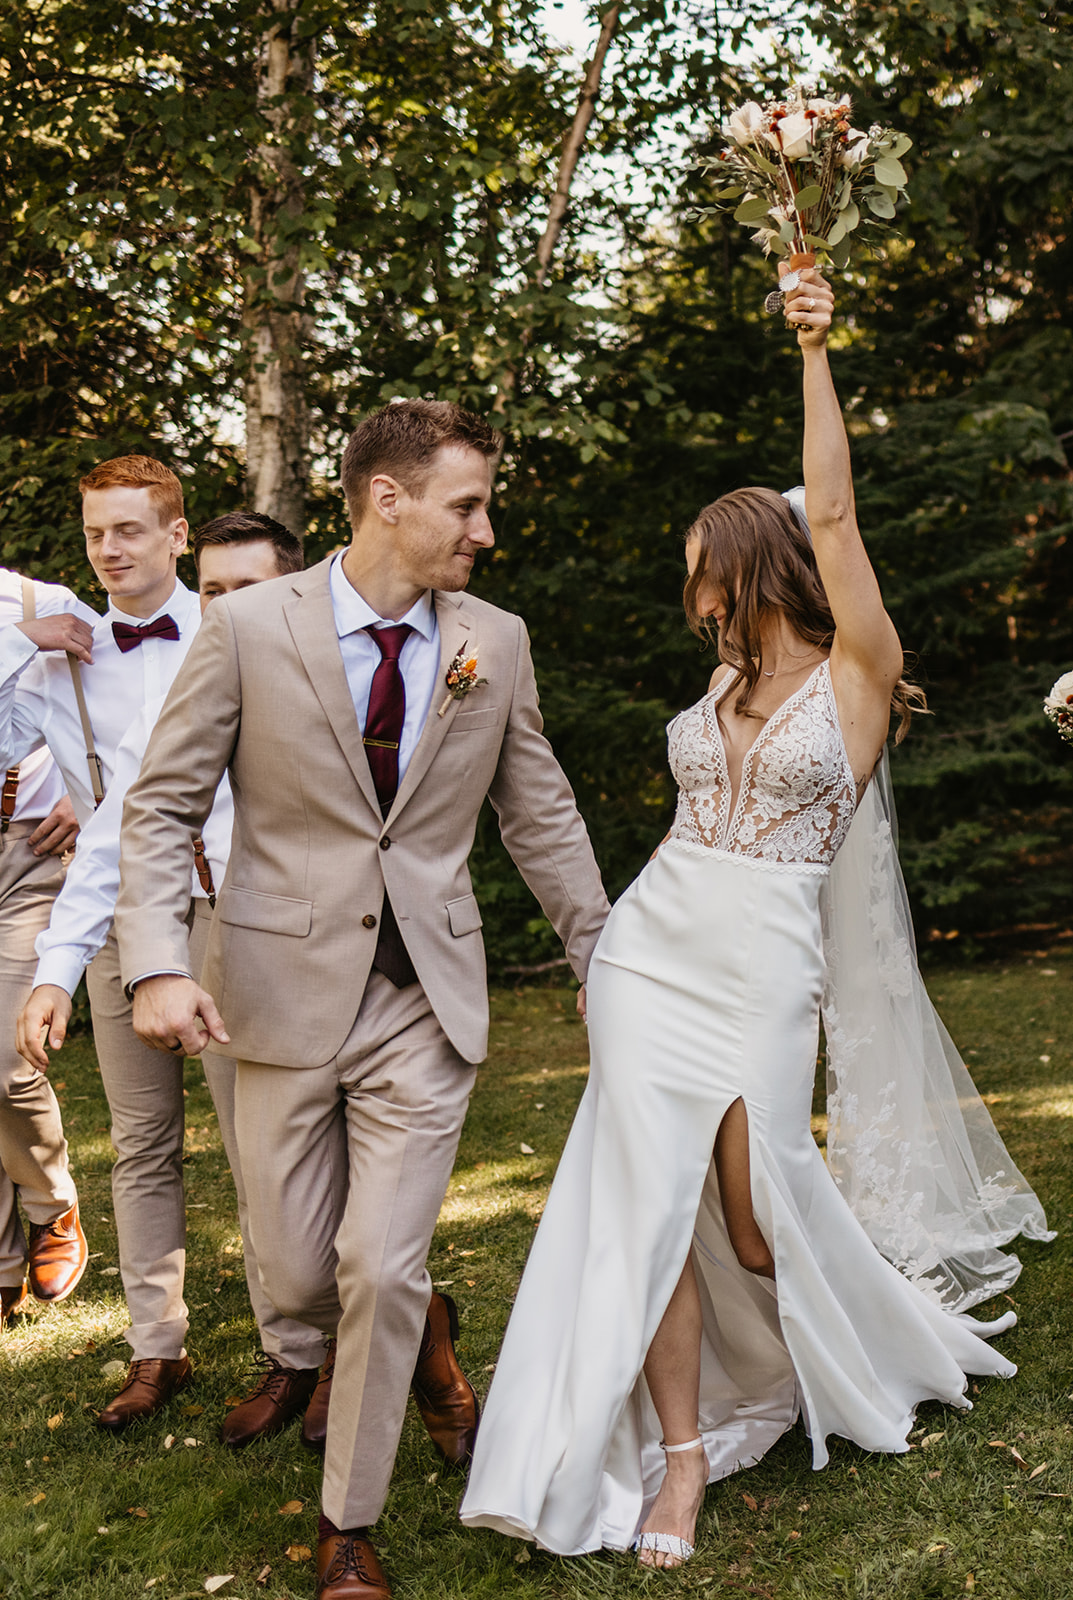 Maddie Lymburner and Chris Hartwig and their wedding party